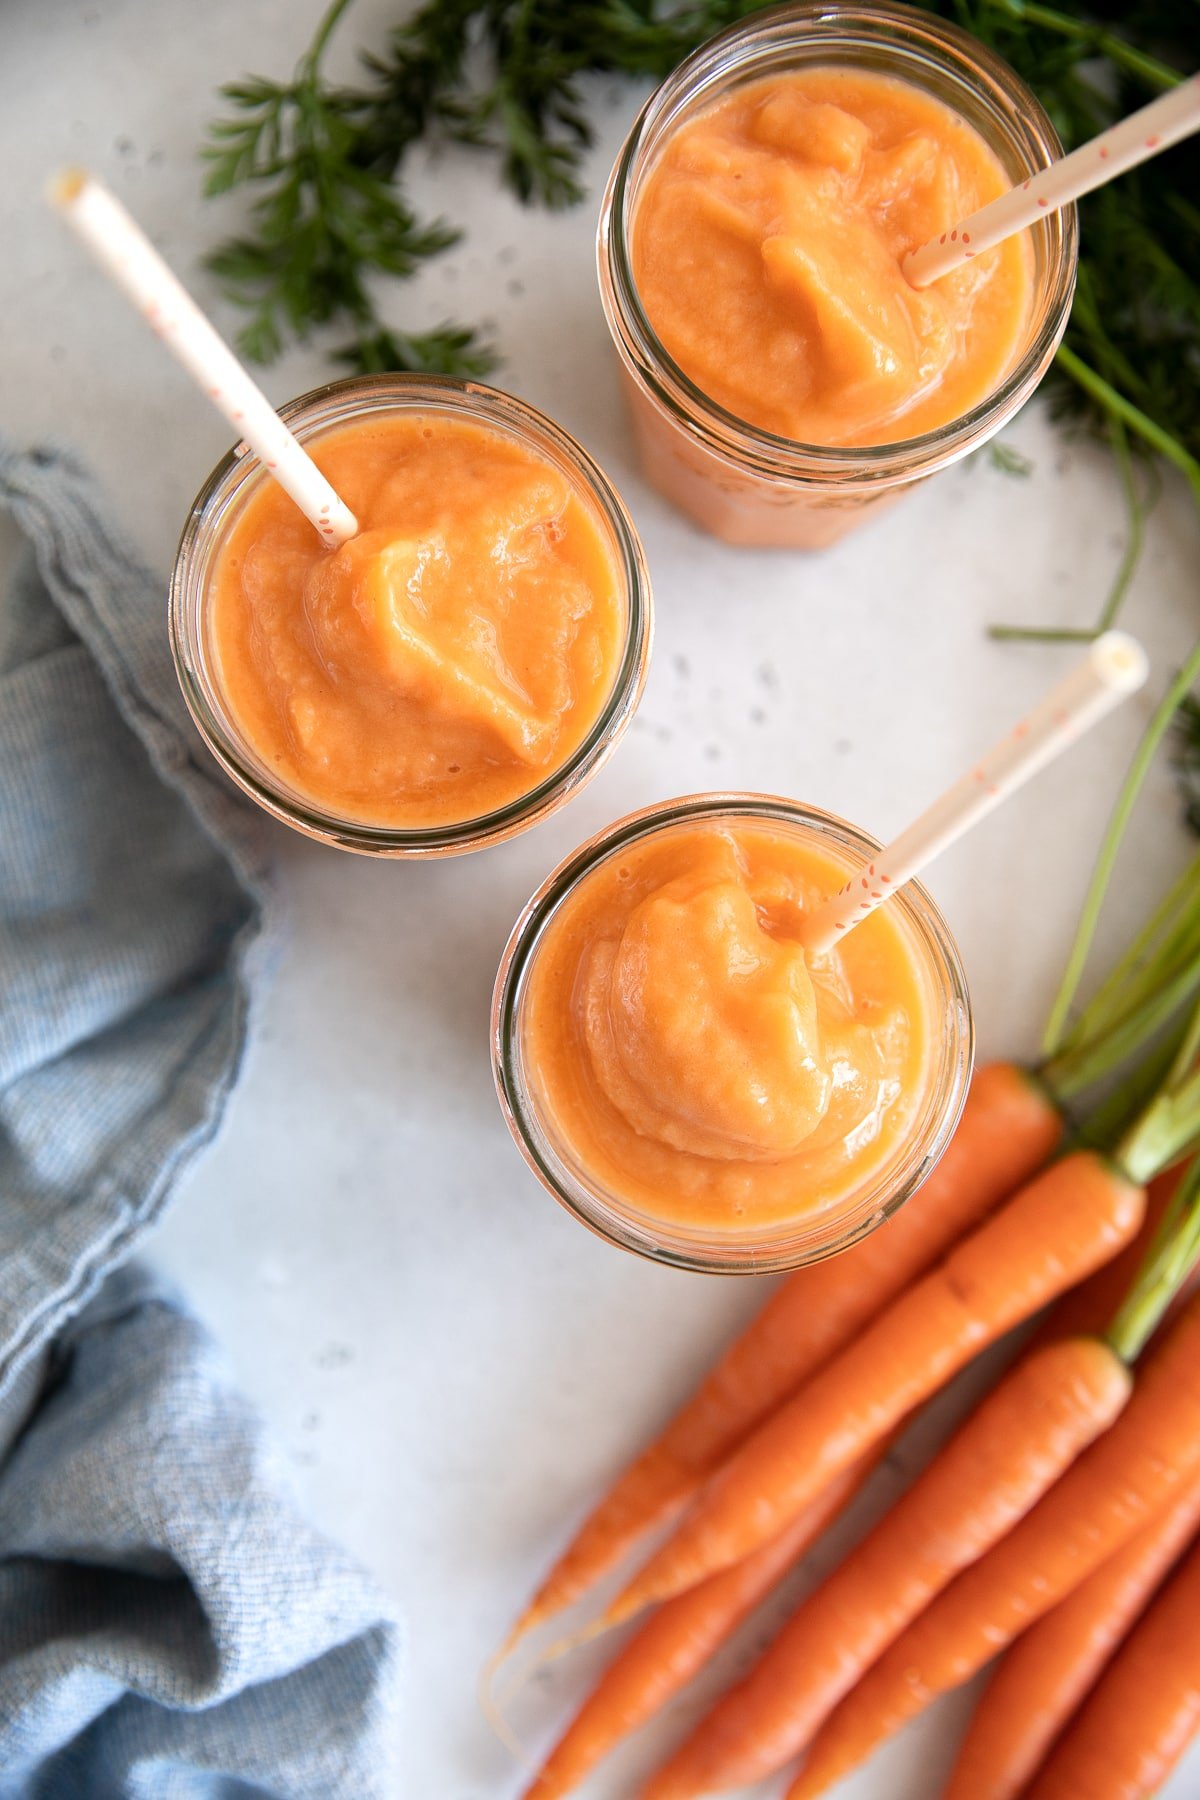 Overhead image of three glasses filled with icy cold carrot smoothie made with carrot juice, ginger, mango, and pineapple.